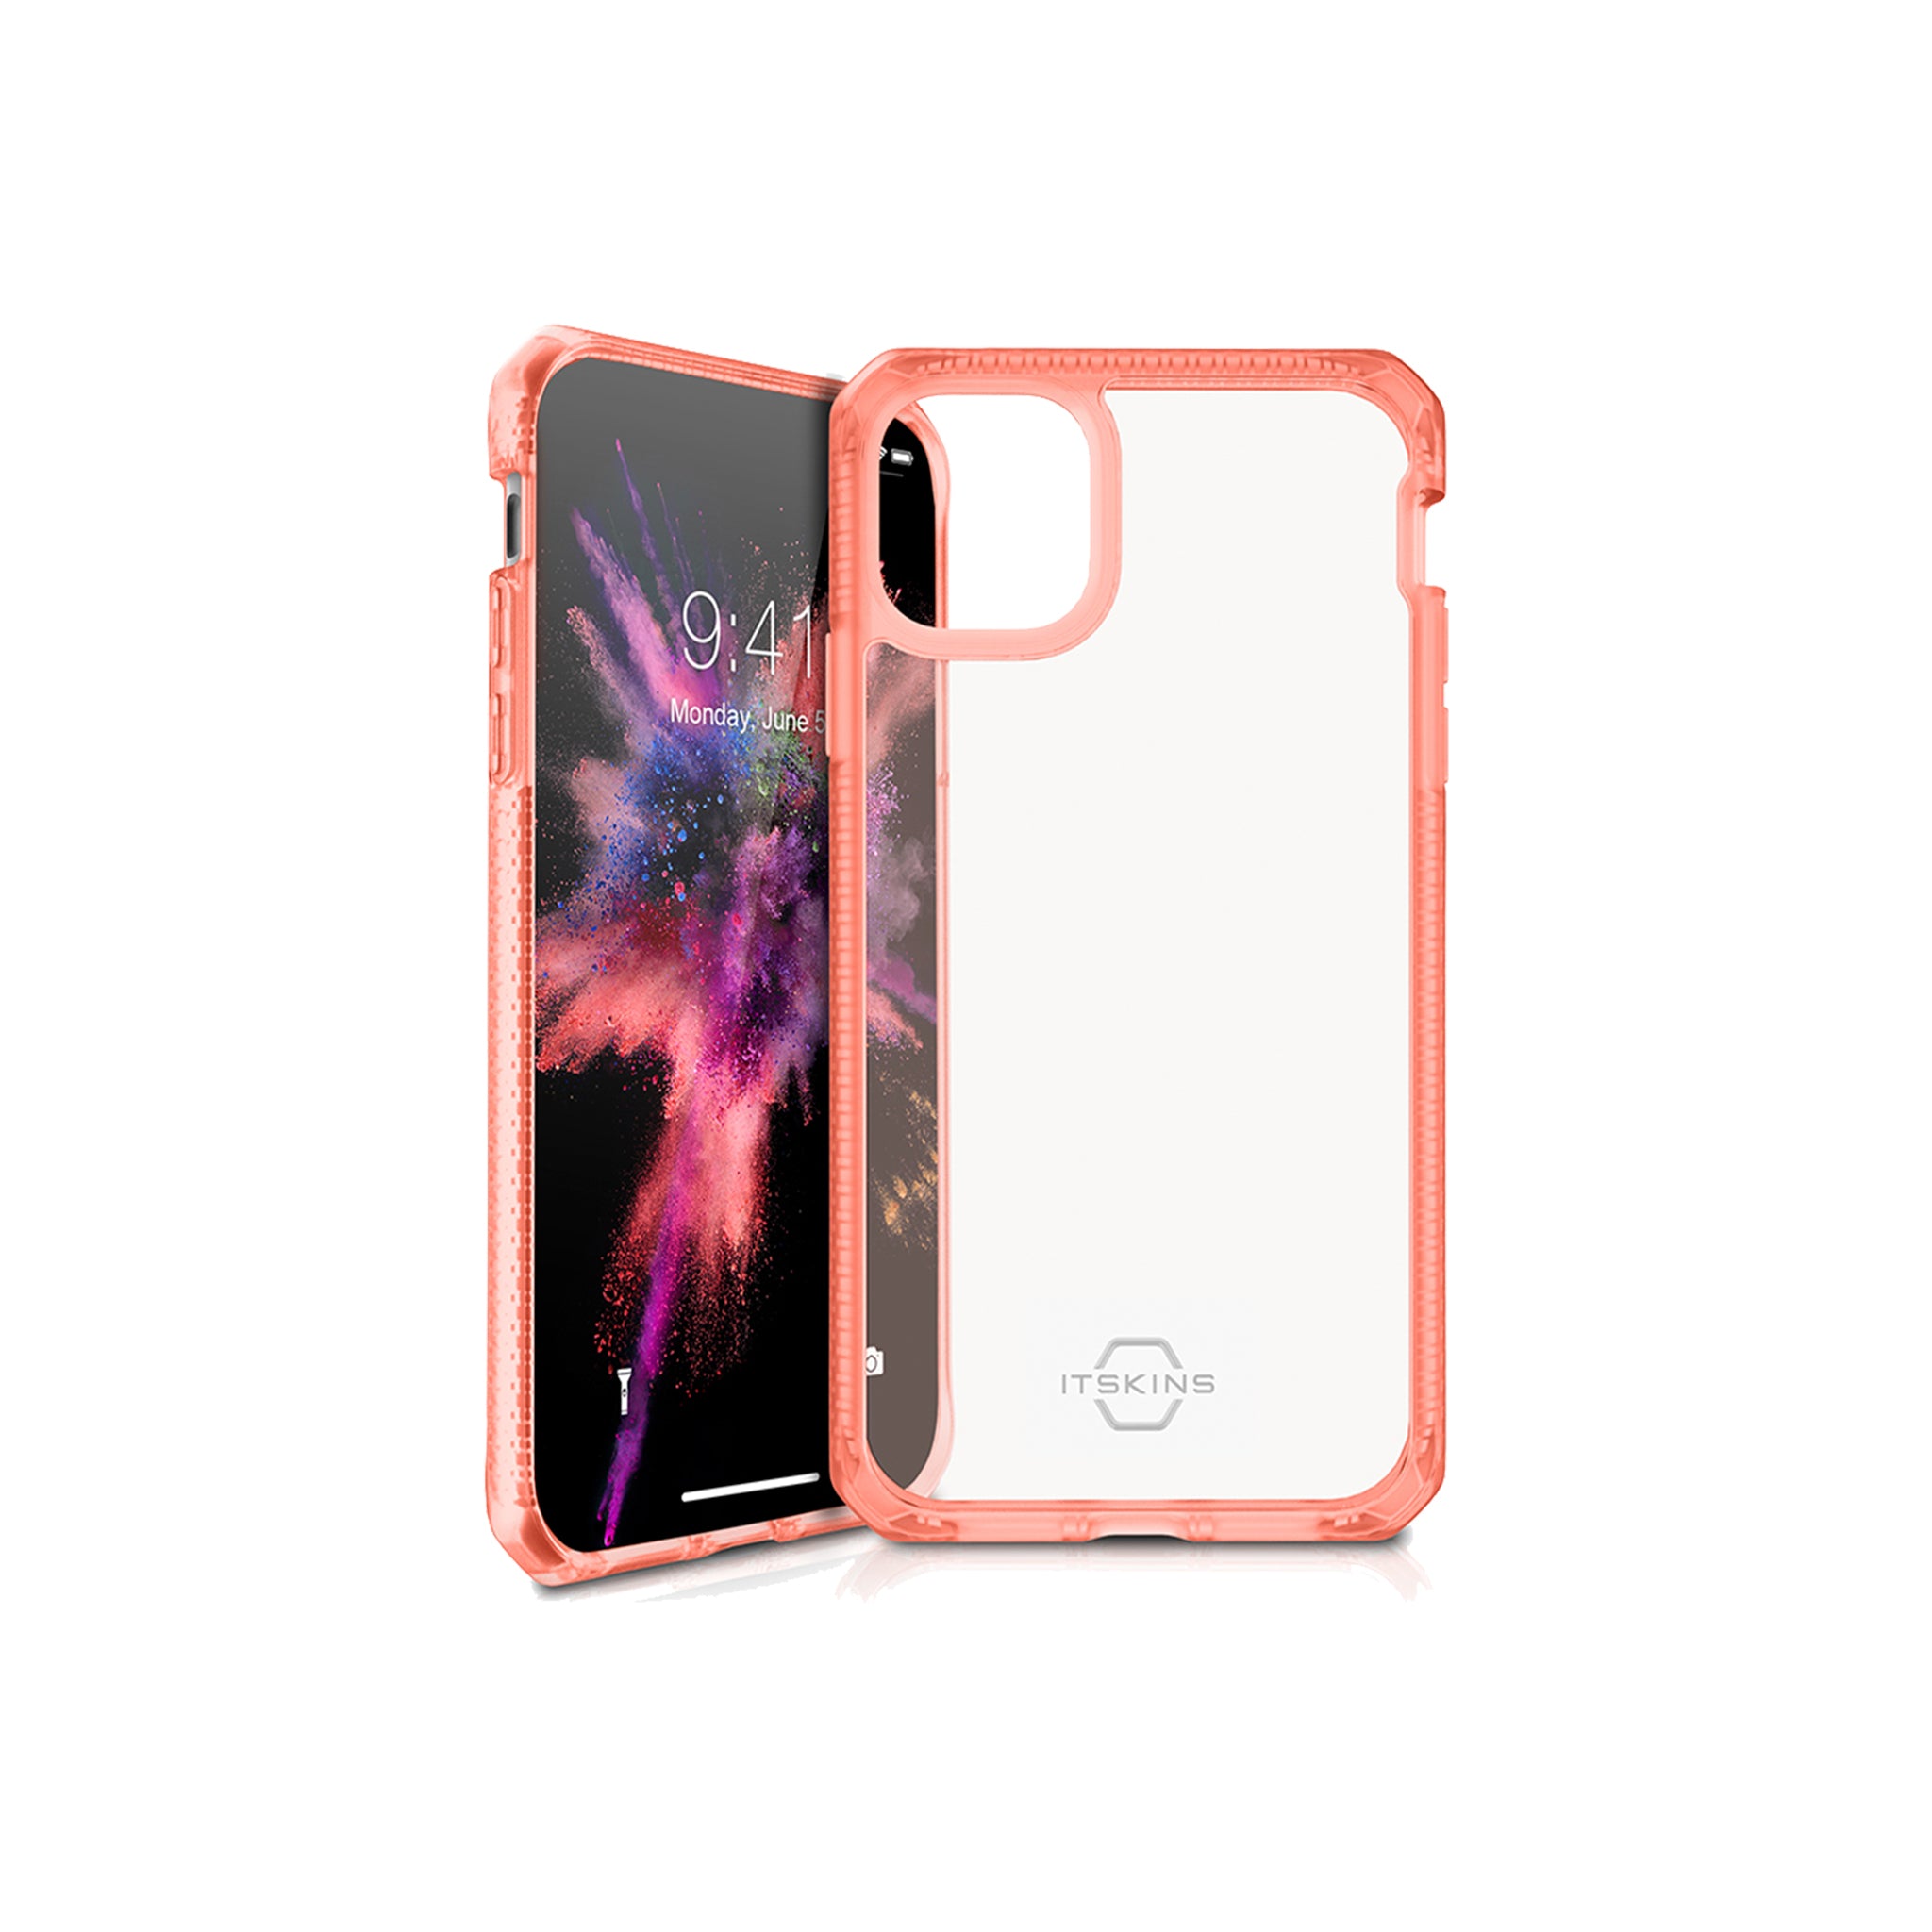 Itskins - Hybrid Frost Mkii Case For Apple Iphone 11 Pro Max - Coral And Transparent